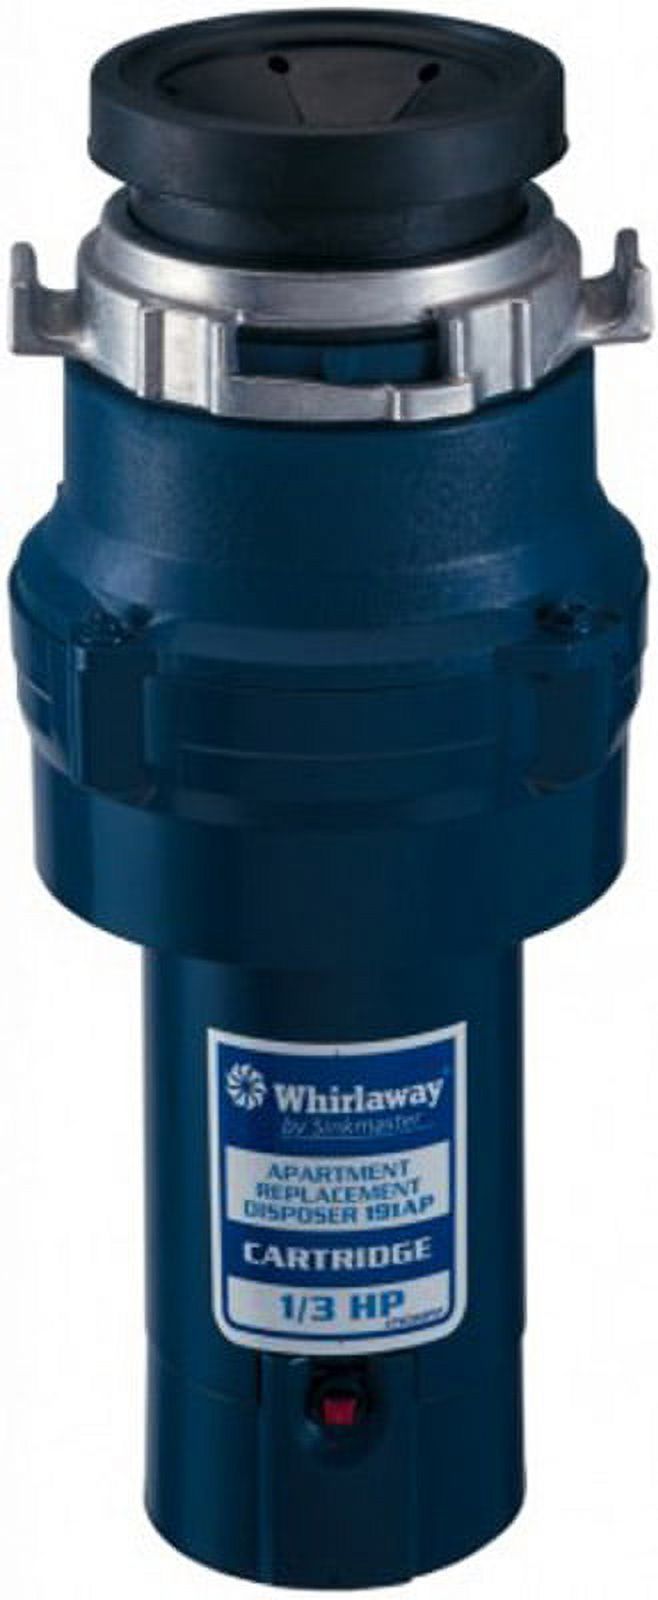 Whirlaway 1/3 HP Garbage Disposal with Power Cord - image 1 of 3